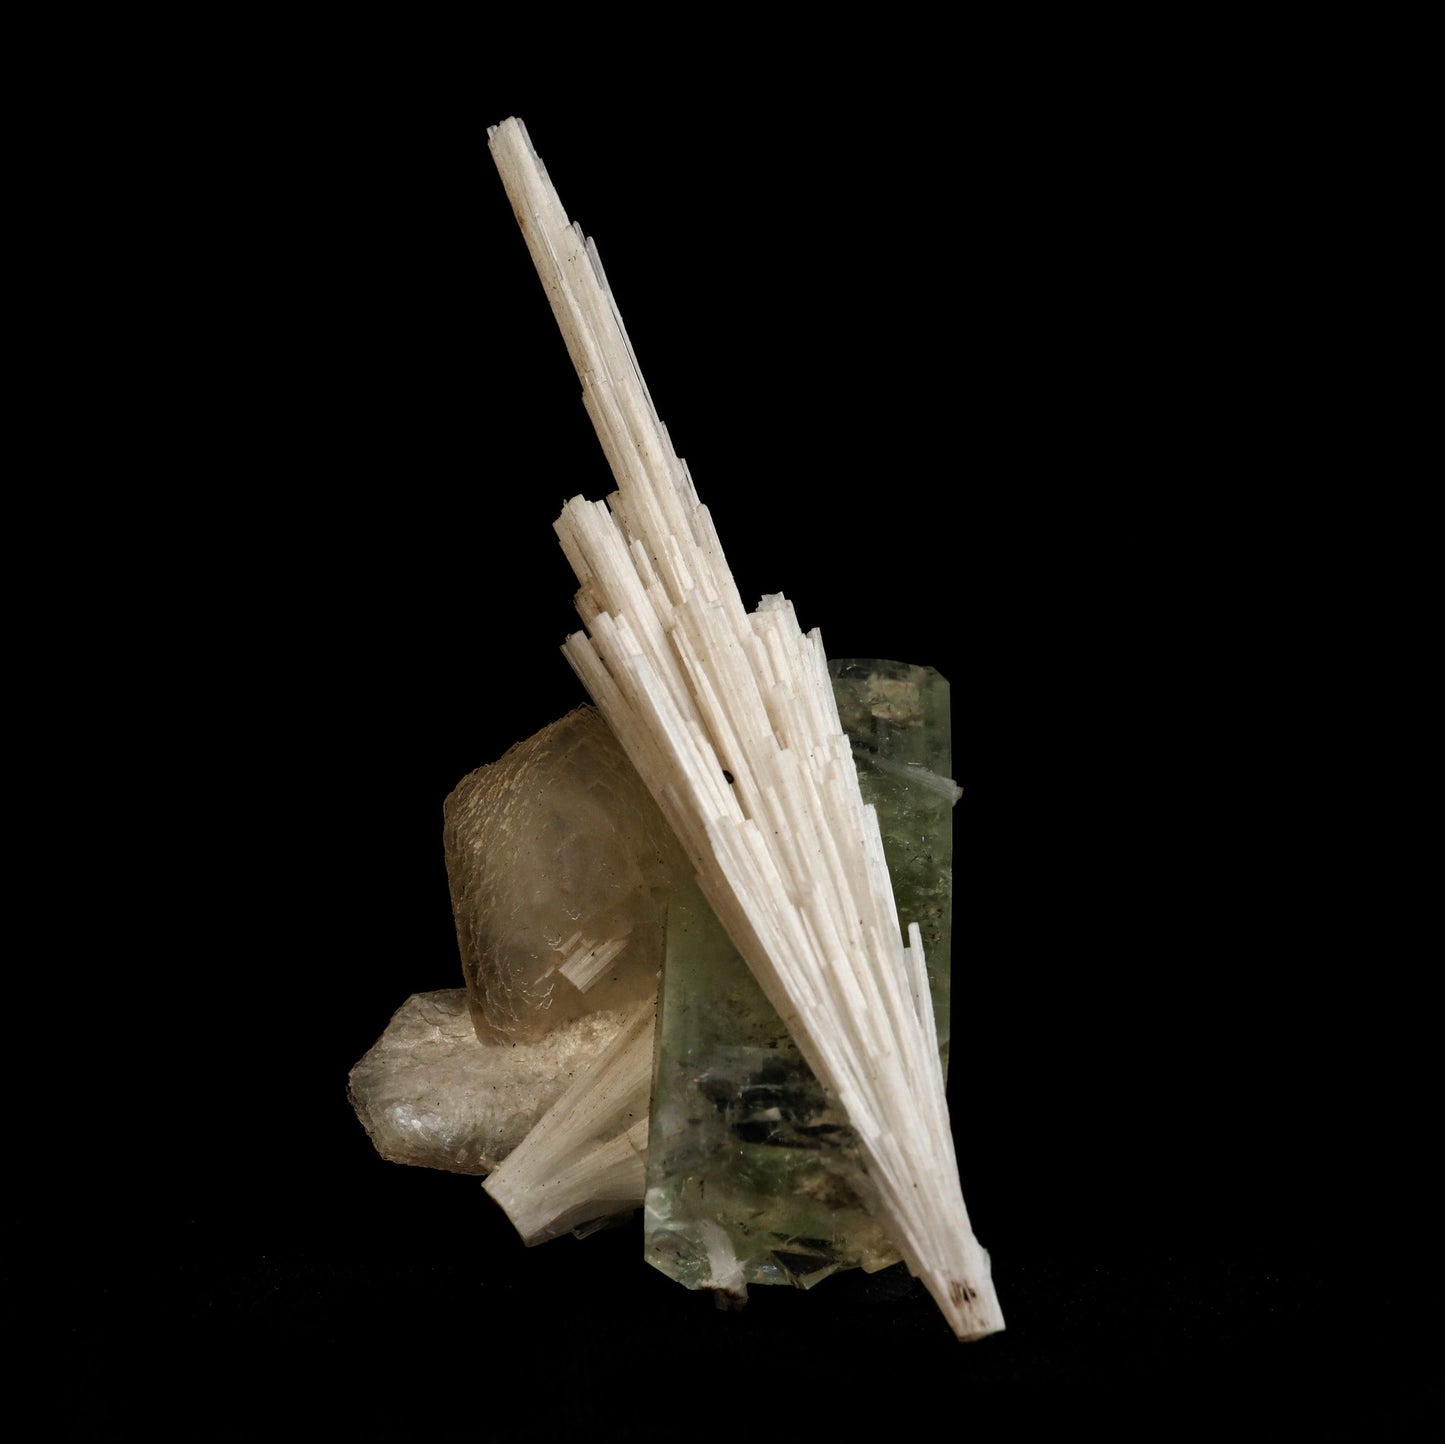 Scolecite Spray on Green Apophyllite with Stilbite Natural Mineral Spe…  https://www.superbminerals.us/products/scolecite-spray-on-green-apophyllite-with-stilbite-natural-mineral-specimen-b-5044  Features: A very large, tapered spray of elongated colorless Scolecite crystals. There is a small remnant of matrix attached with a small Stilbite crystal & light green apophyllite crystals. The Scolecite crystals are glassy and highly translucent with transparent terminations. A beautiful specimen in excellent 